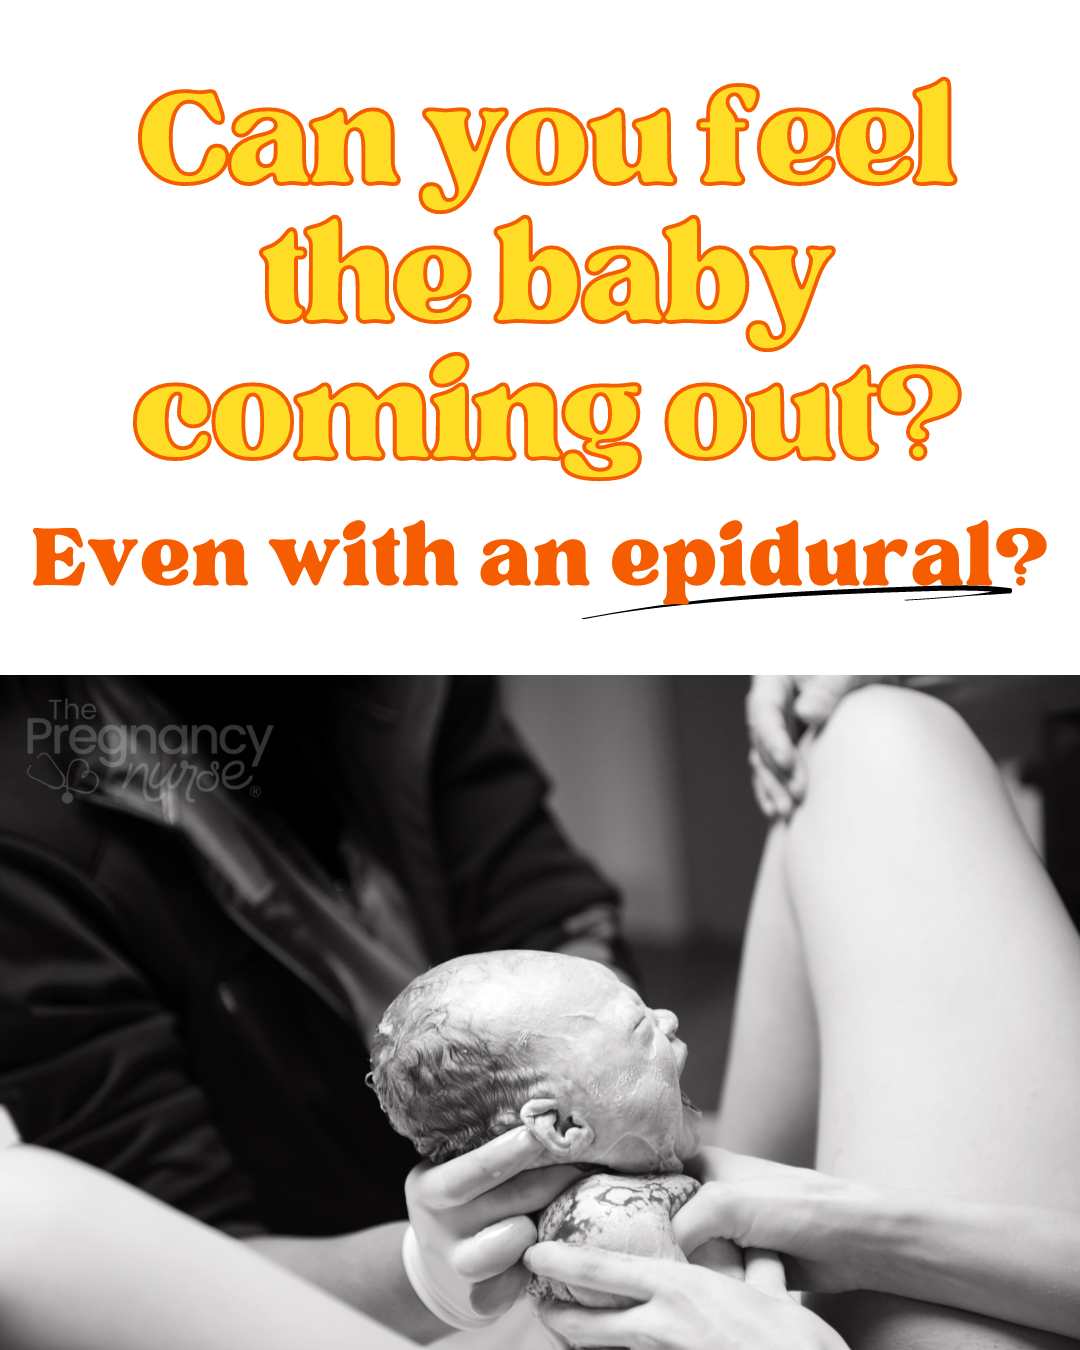 Can you feel labor pains when you get an epidural? How much pain relief will you get from contractions with your epidural for labor? What to expect with pain management from anesthesia?